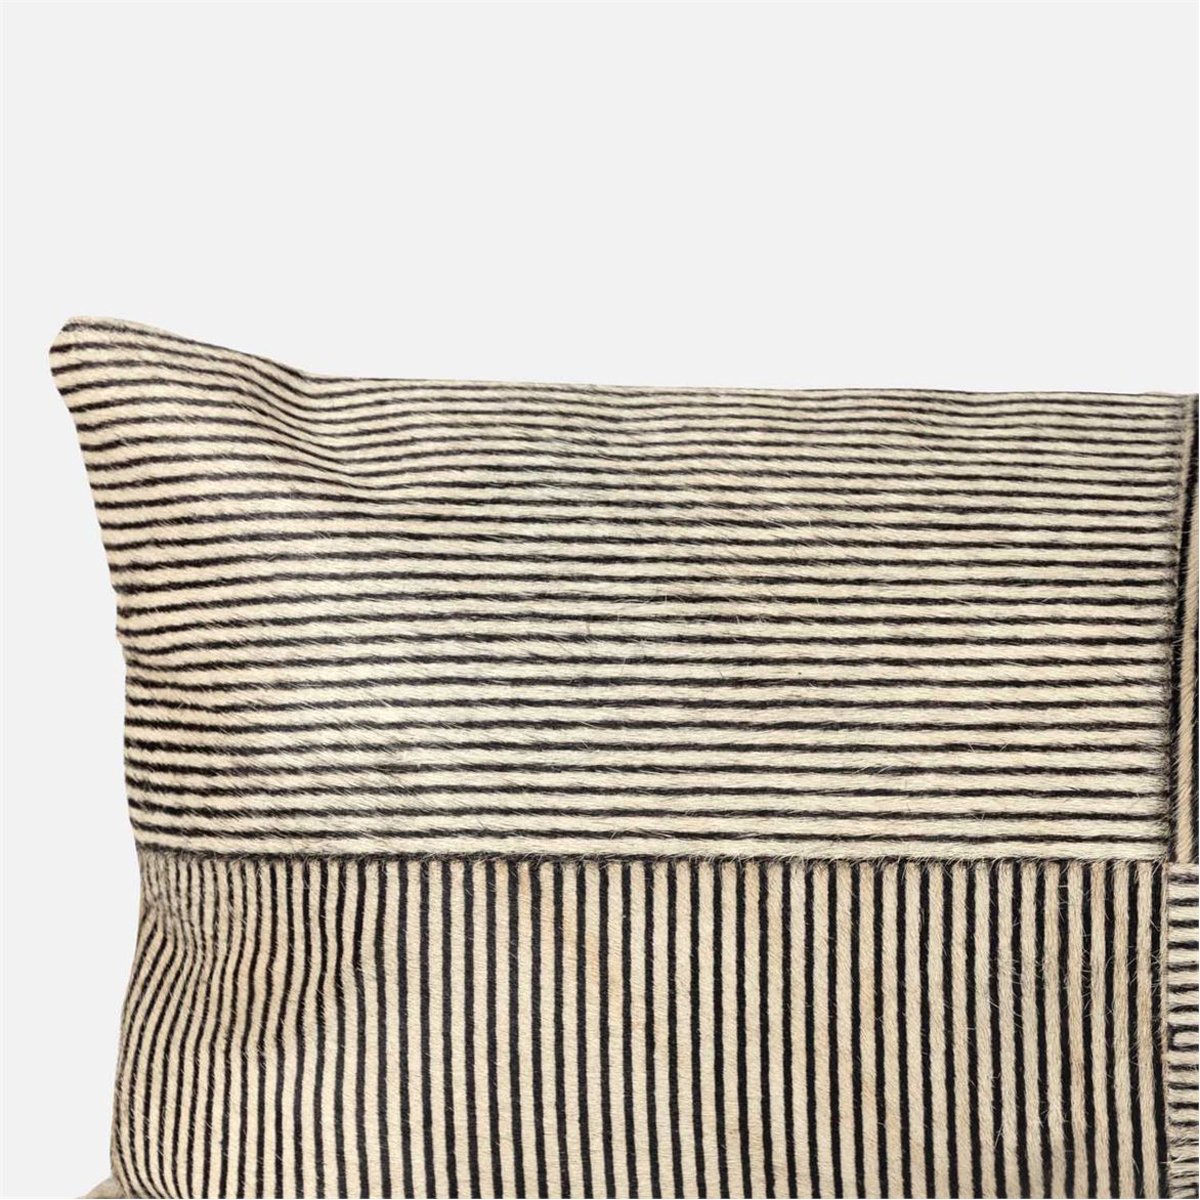 Made Goods Quincy Brown Candy Striped Hair-On-Hide Pillows, Set of 2